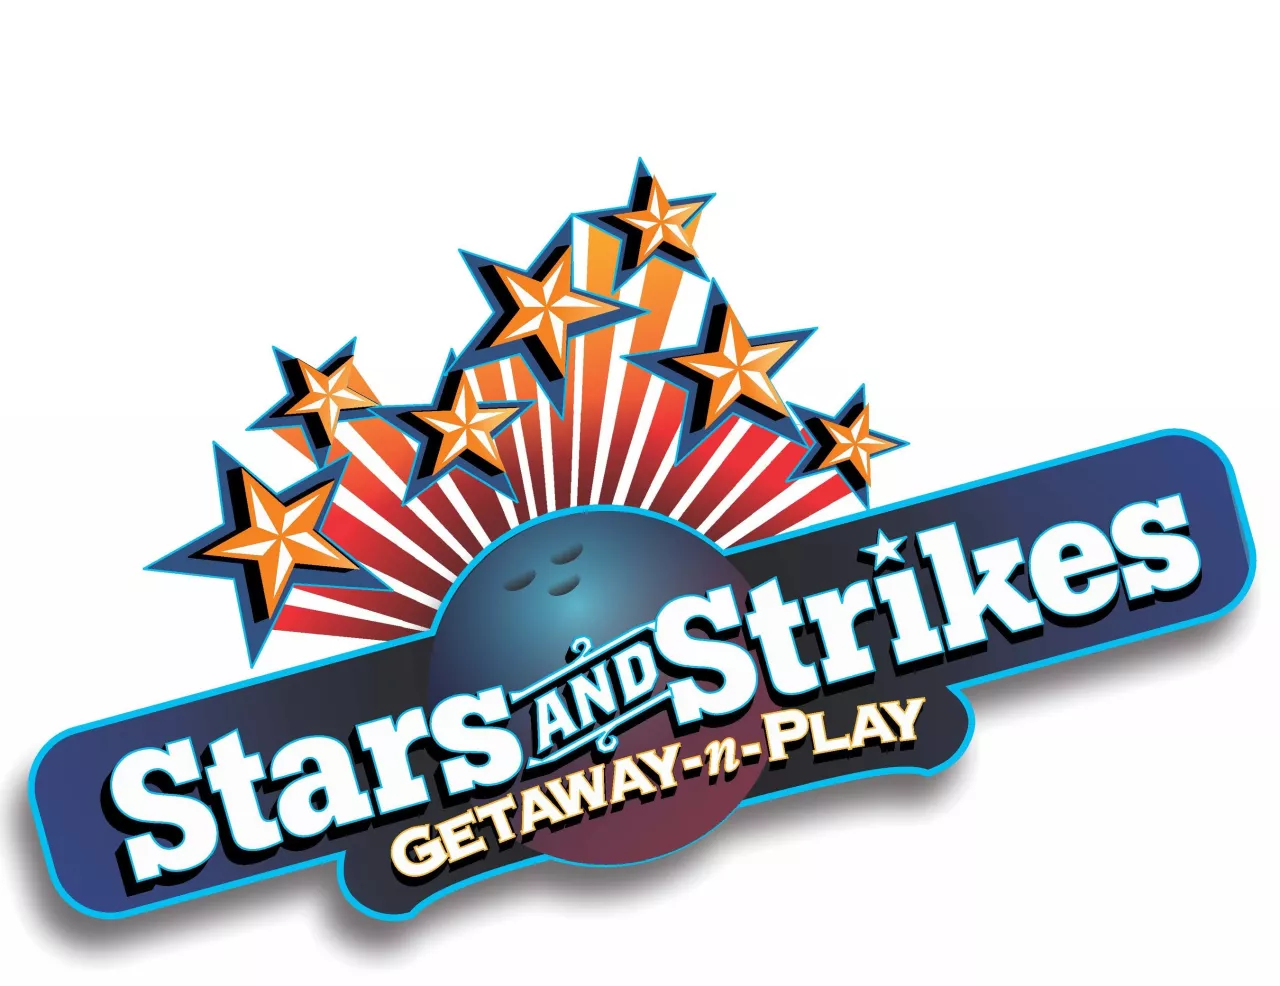 STARS AND STRIKES SUMMERVILLE EXPANDS THEIR ARCADE